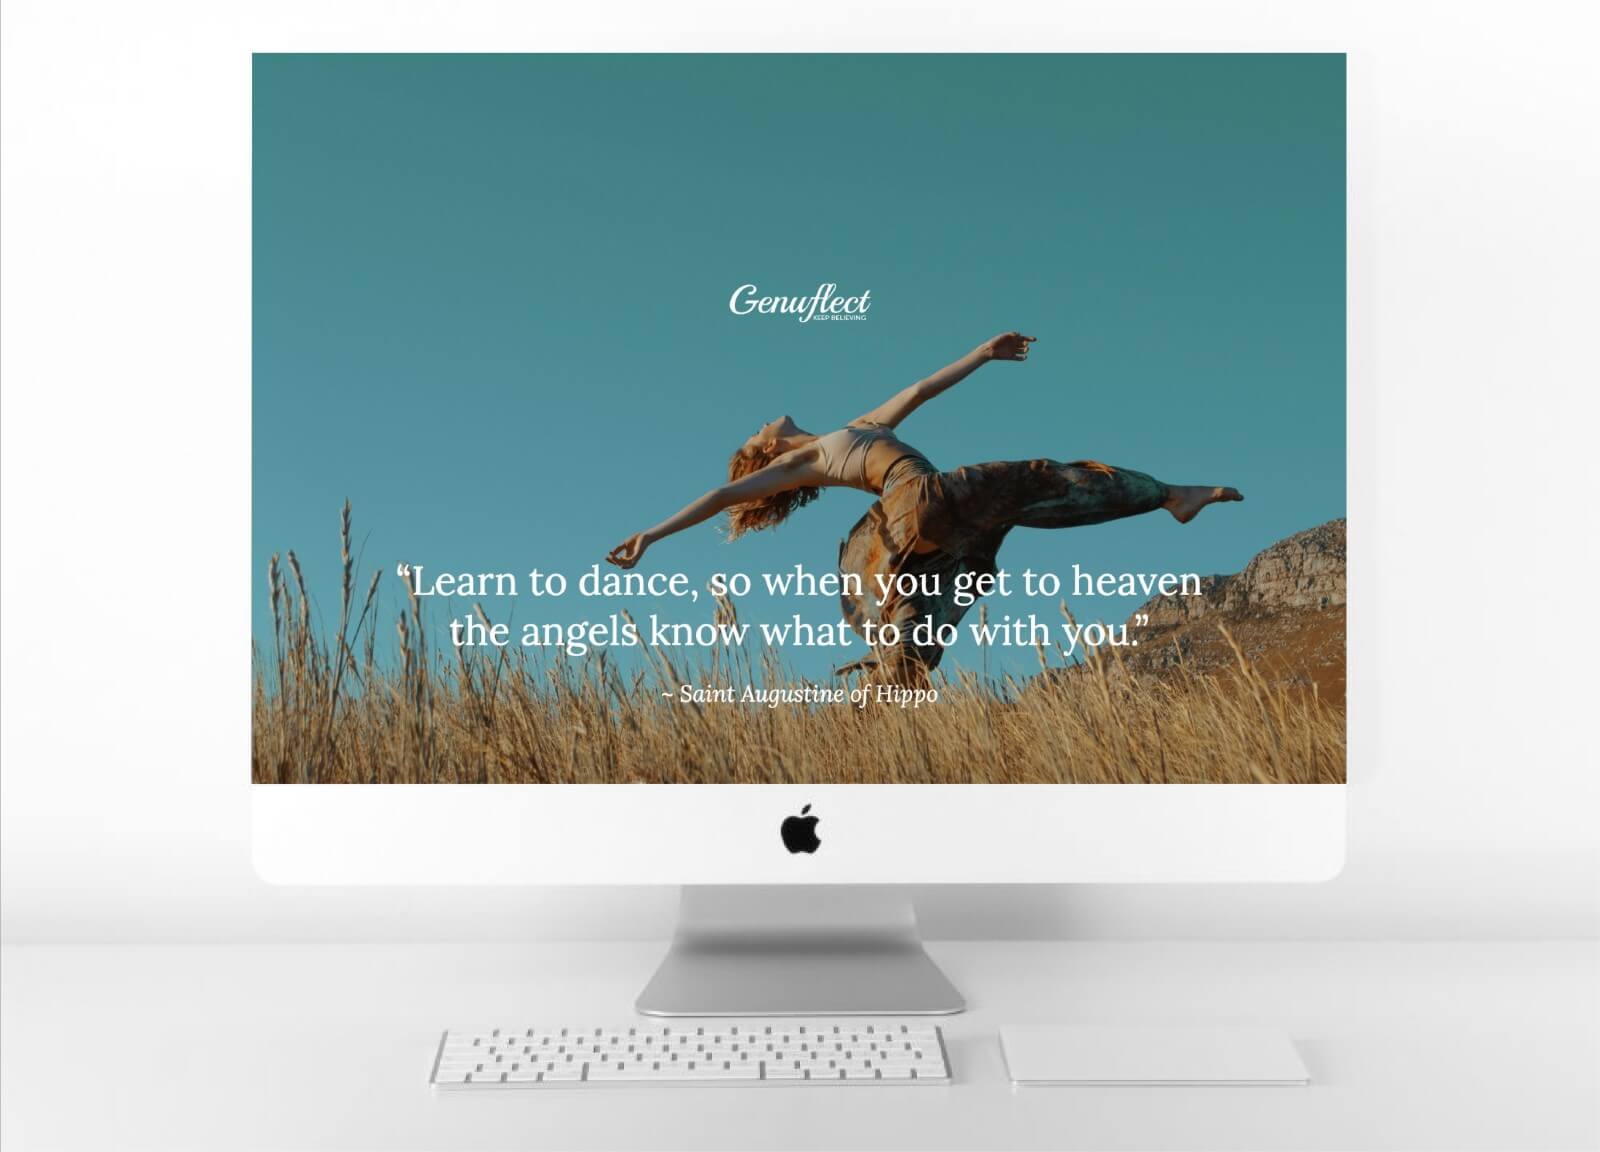 Genuflect image on computer background of a Woman outside dancing in a field